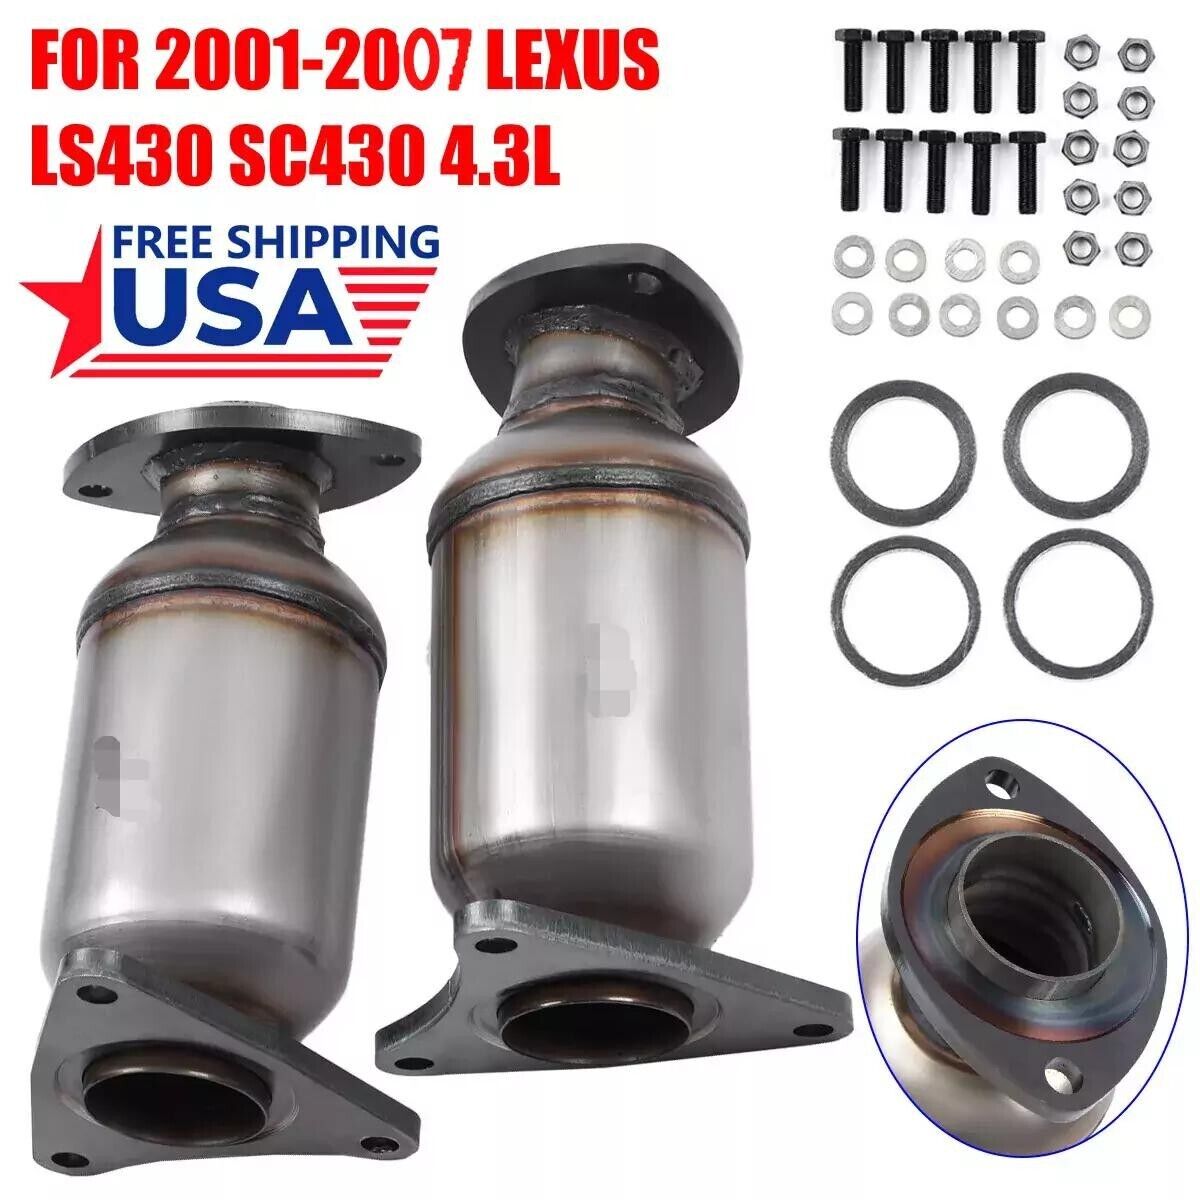 Both Front Catalytic Converters 2001-2007 US FAST NEW for Lexus LS430 GS430 4.3L